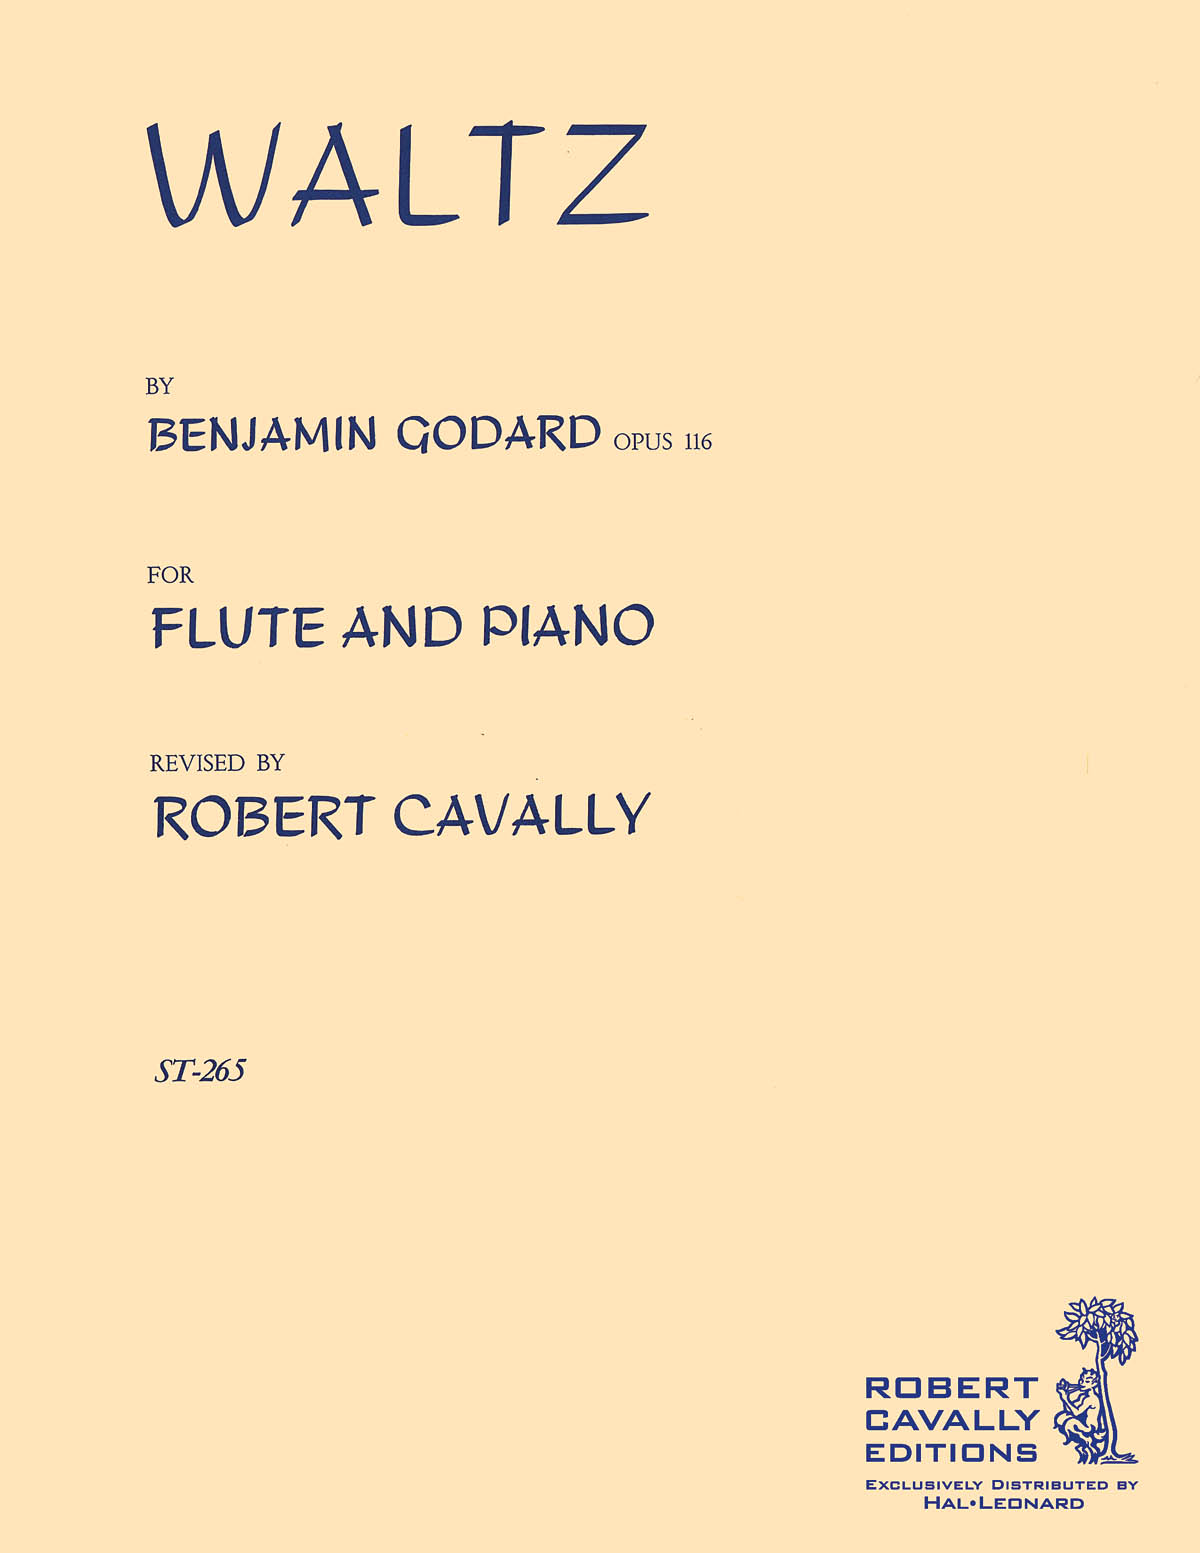 Benjamin Godard: Waltz from Suite in Bb for Flute and Orch. Op 116